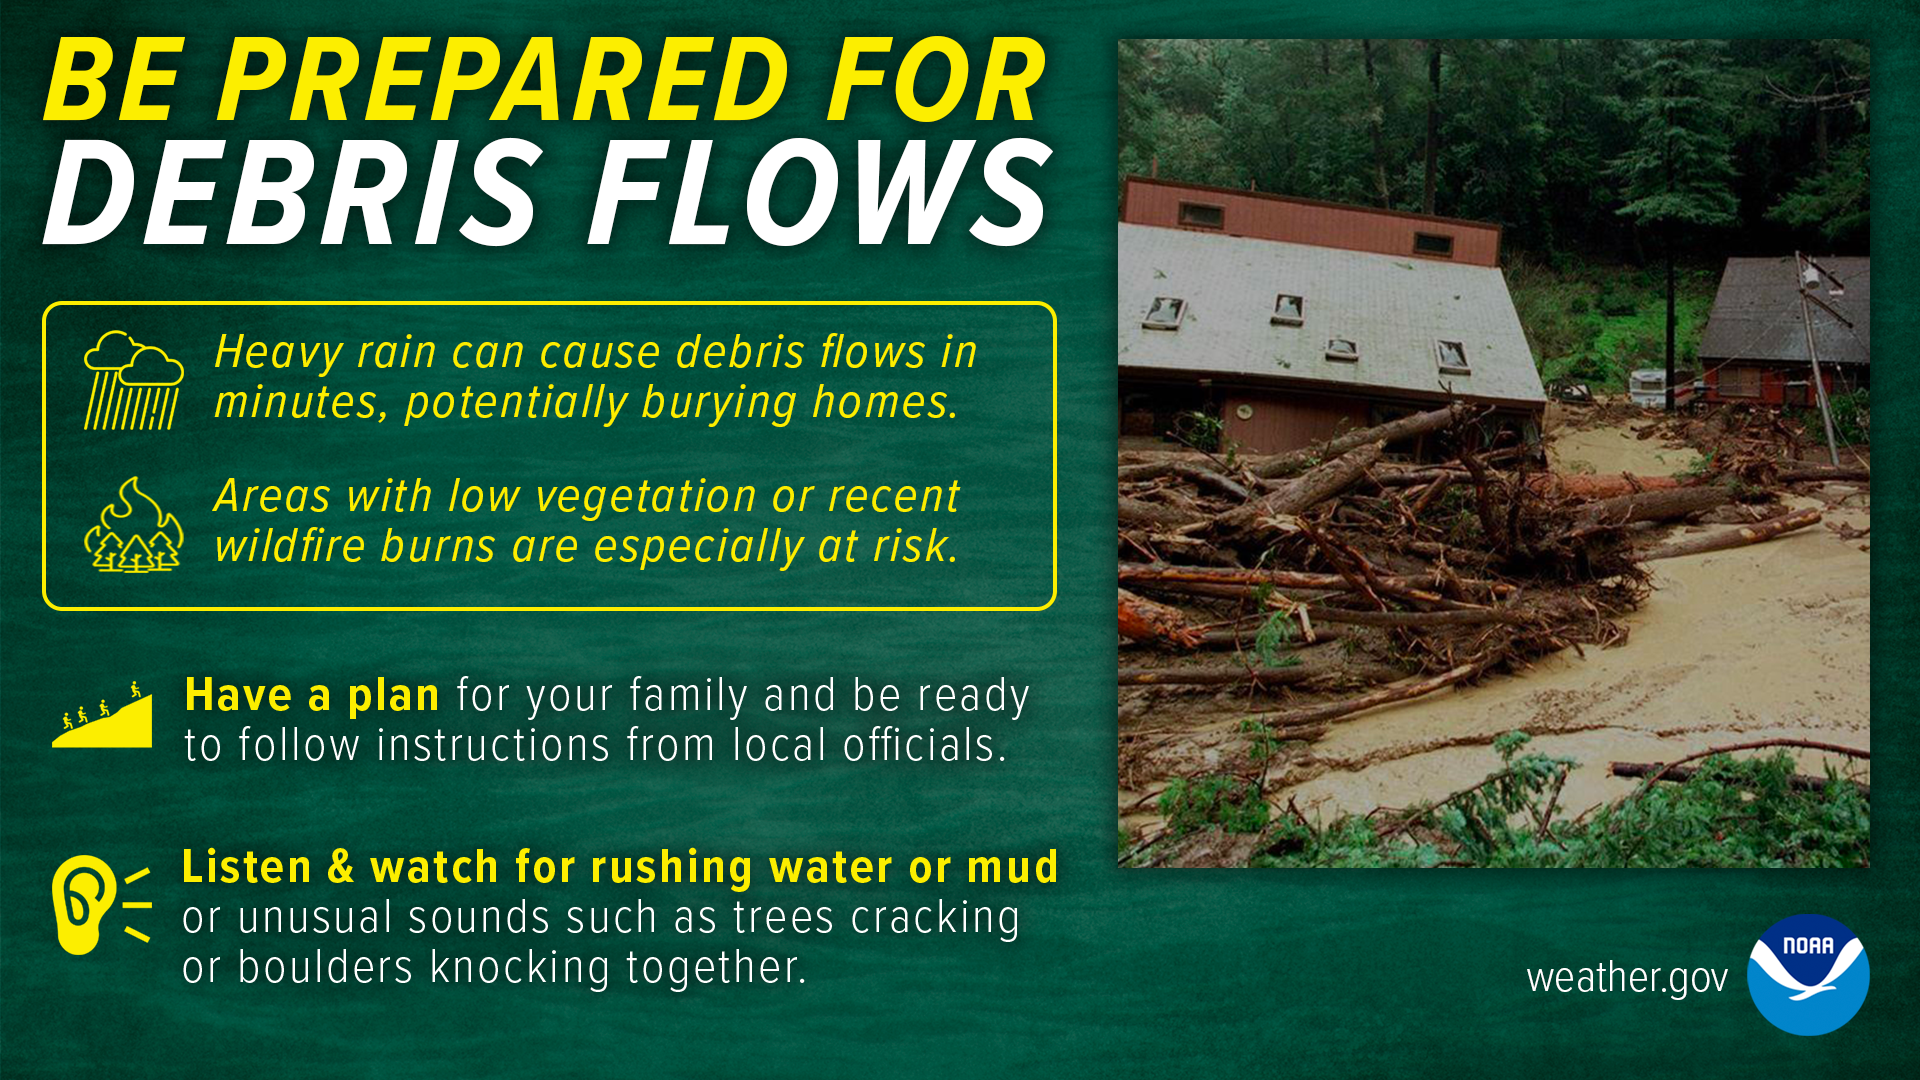 Be prepared for debris flows. Heavy rain can cause debris flows in minutes, potentially burying homes. Areas with low vegetation or recent wildfire burns are especially at risk. Have a plan for your family and be ready to follow instructions from local officials. Listen & watch for rushing water or mud or unusual sounds such as trees cracking or boulders knocking together.